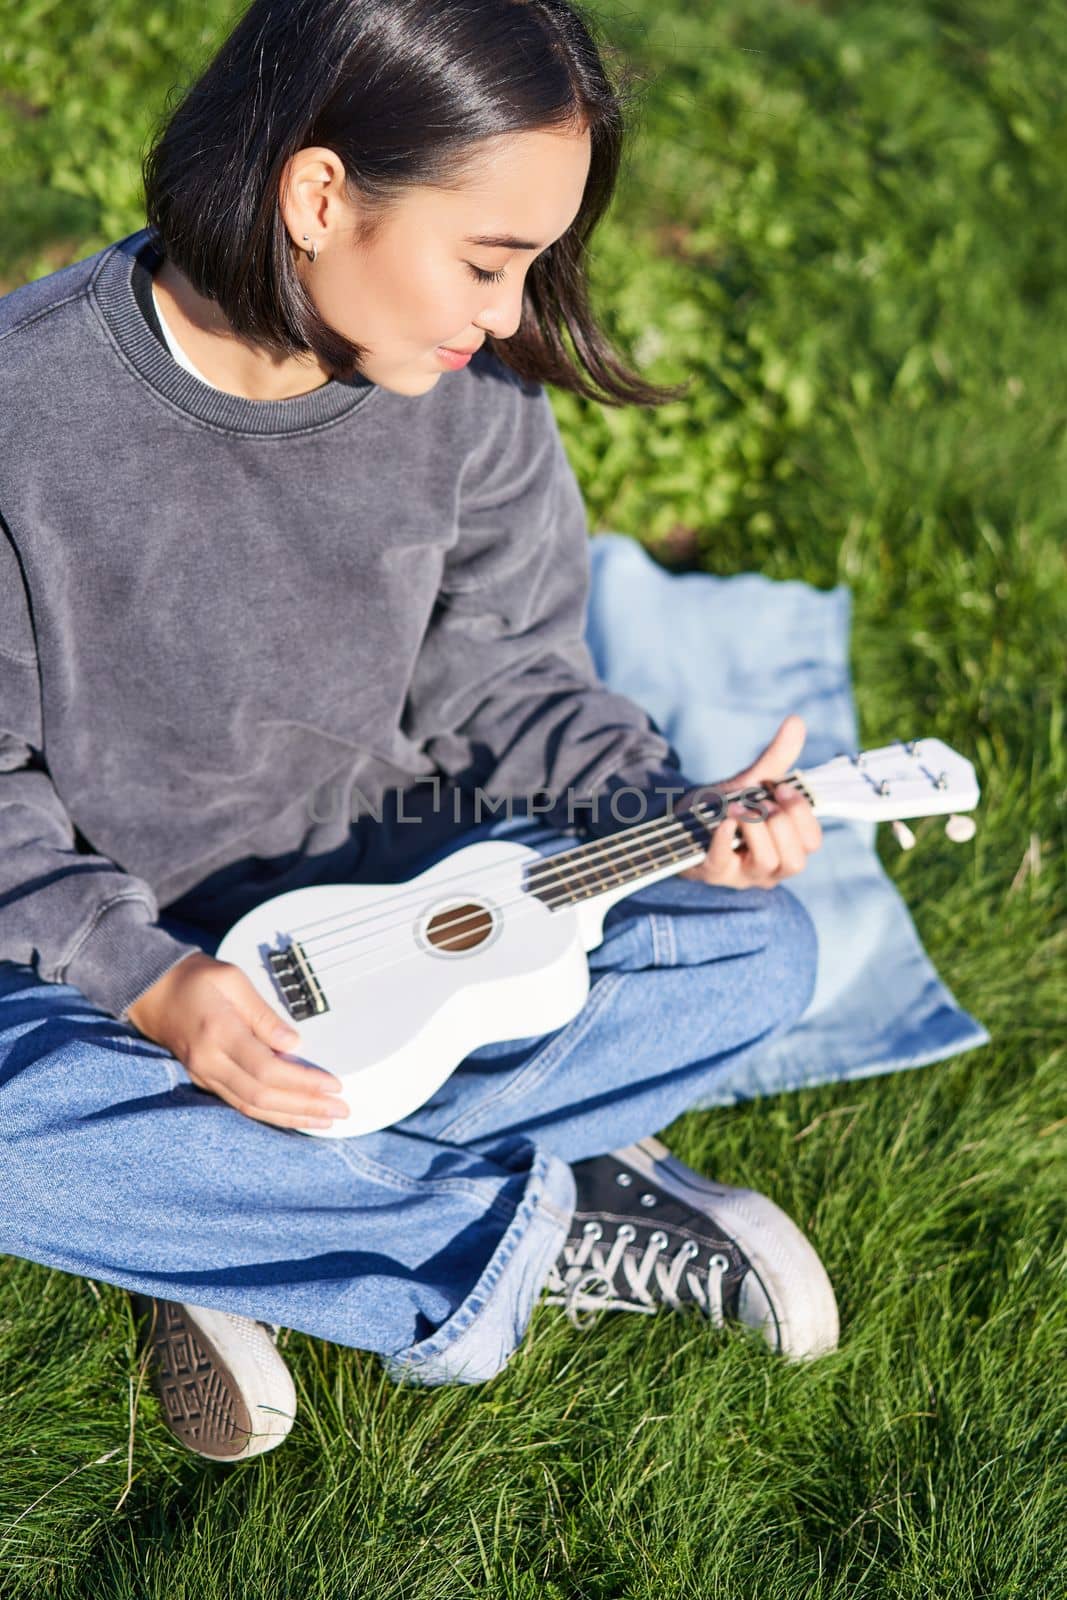 Vertical shot of girl musician, looking with care at her white ukulele guitar, playing music in park, sitting on grass.